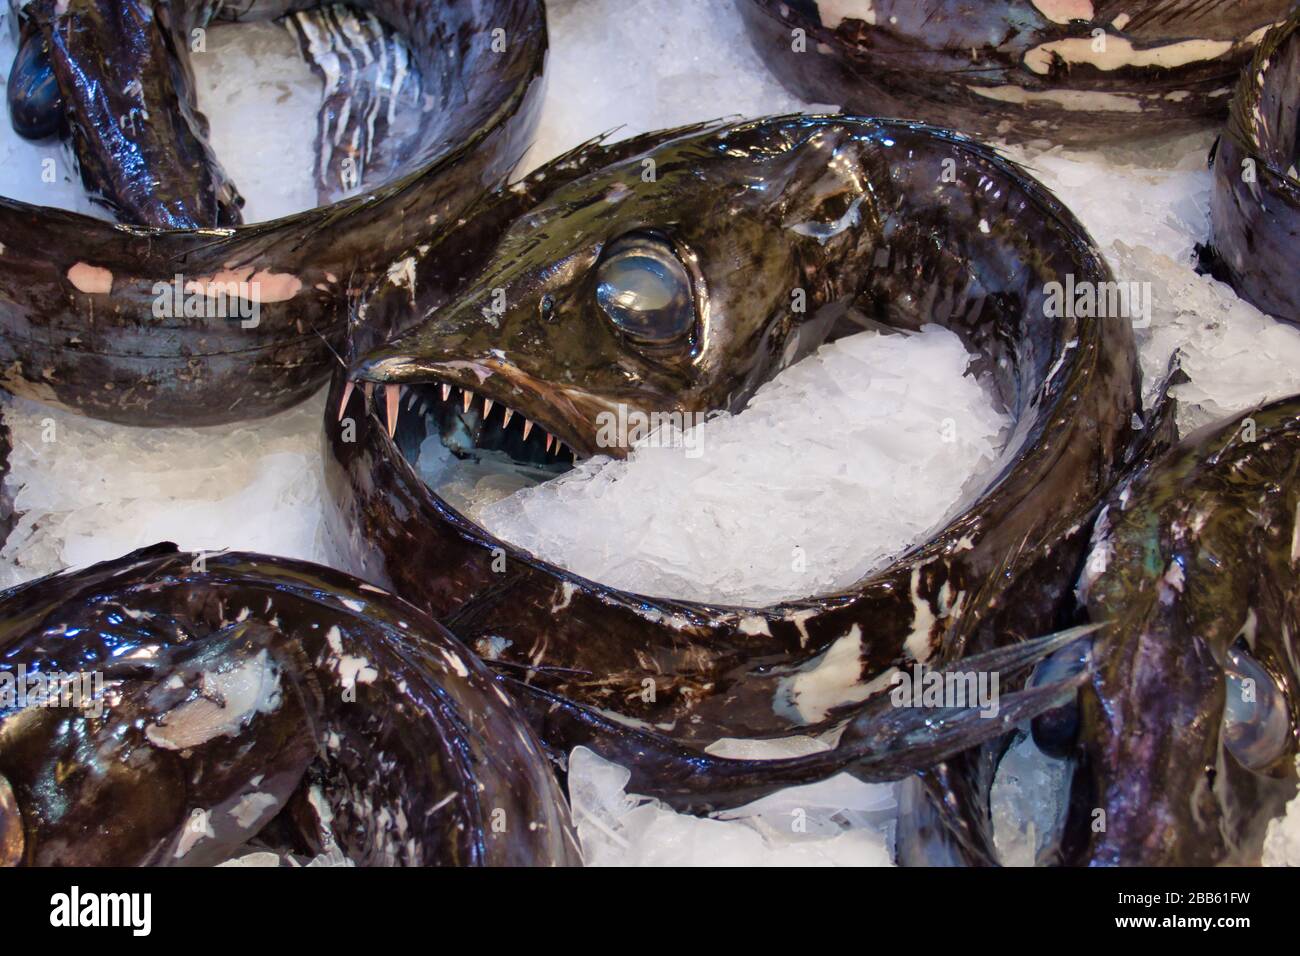 Black scabbard fish (aphanopus carbo) prepared for sale on ice at a fish counter in a supermarket on the island of Madeira Stock Photo